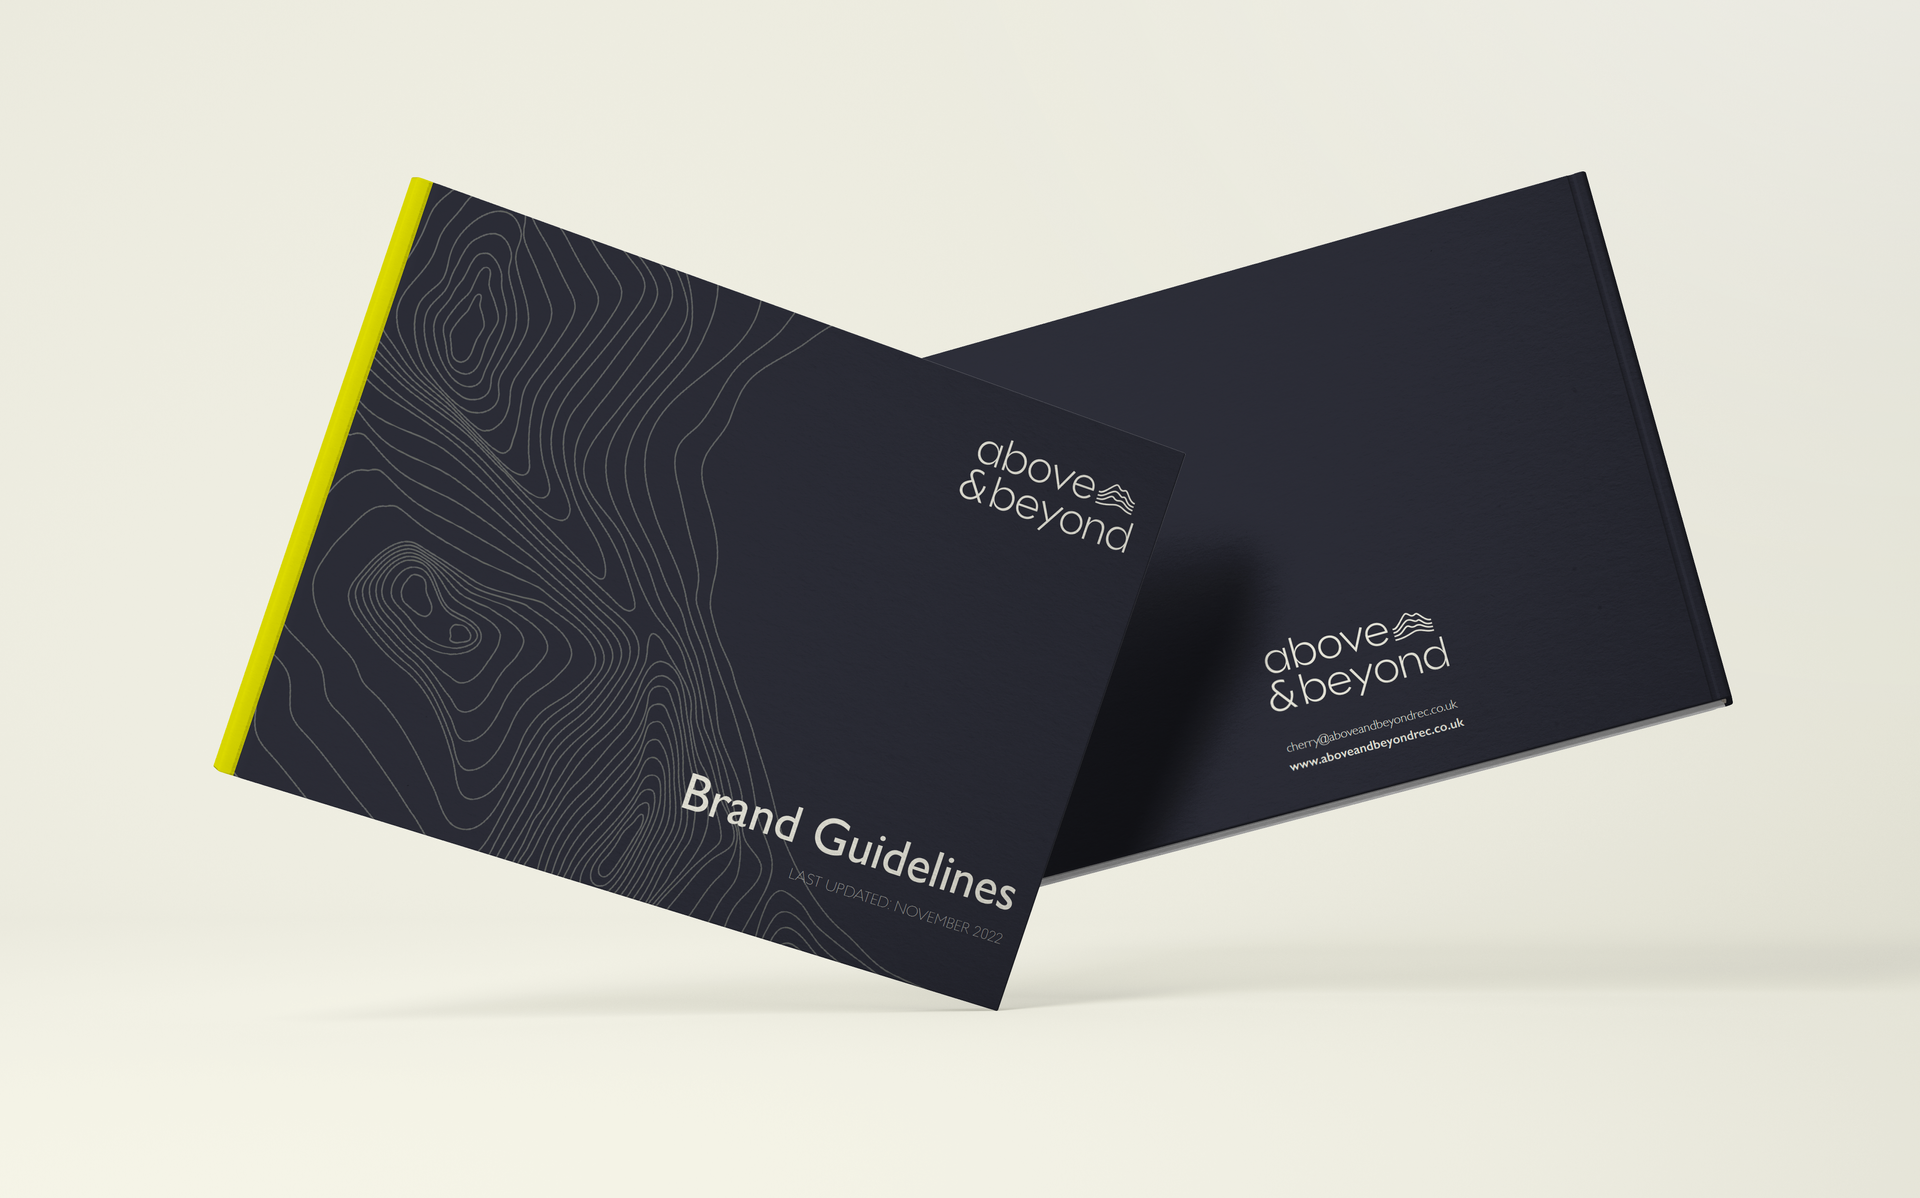 A front and back cover of a brand guidelines booklet for above and beyond in navy blue with a neon yellow spine.